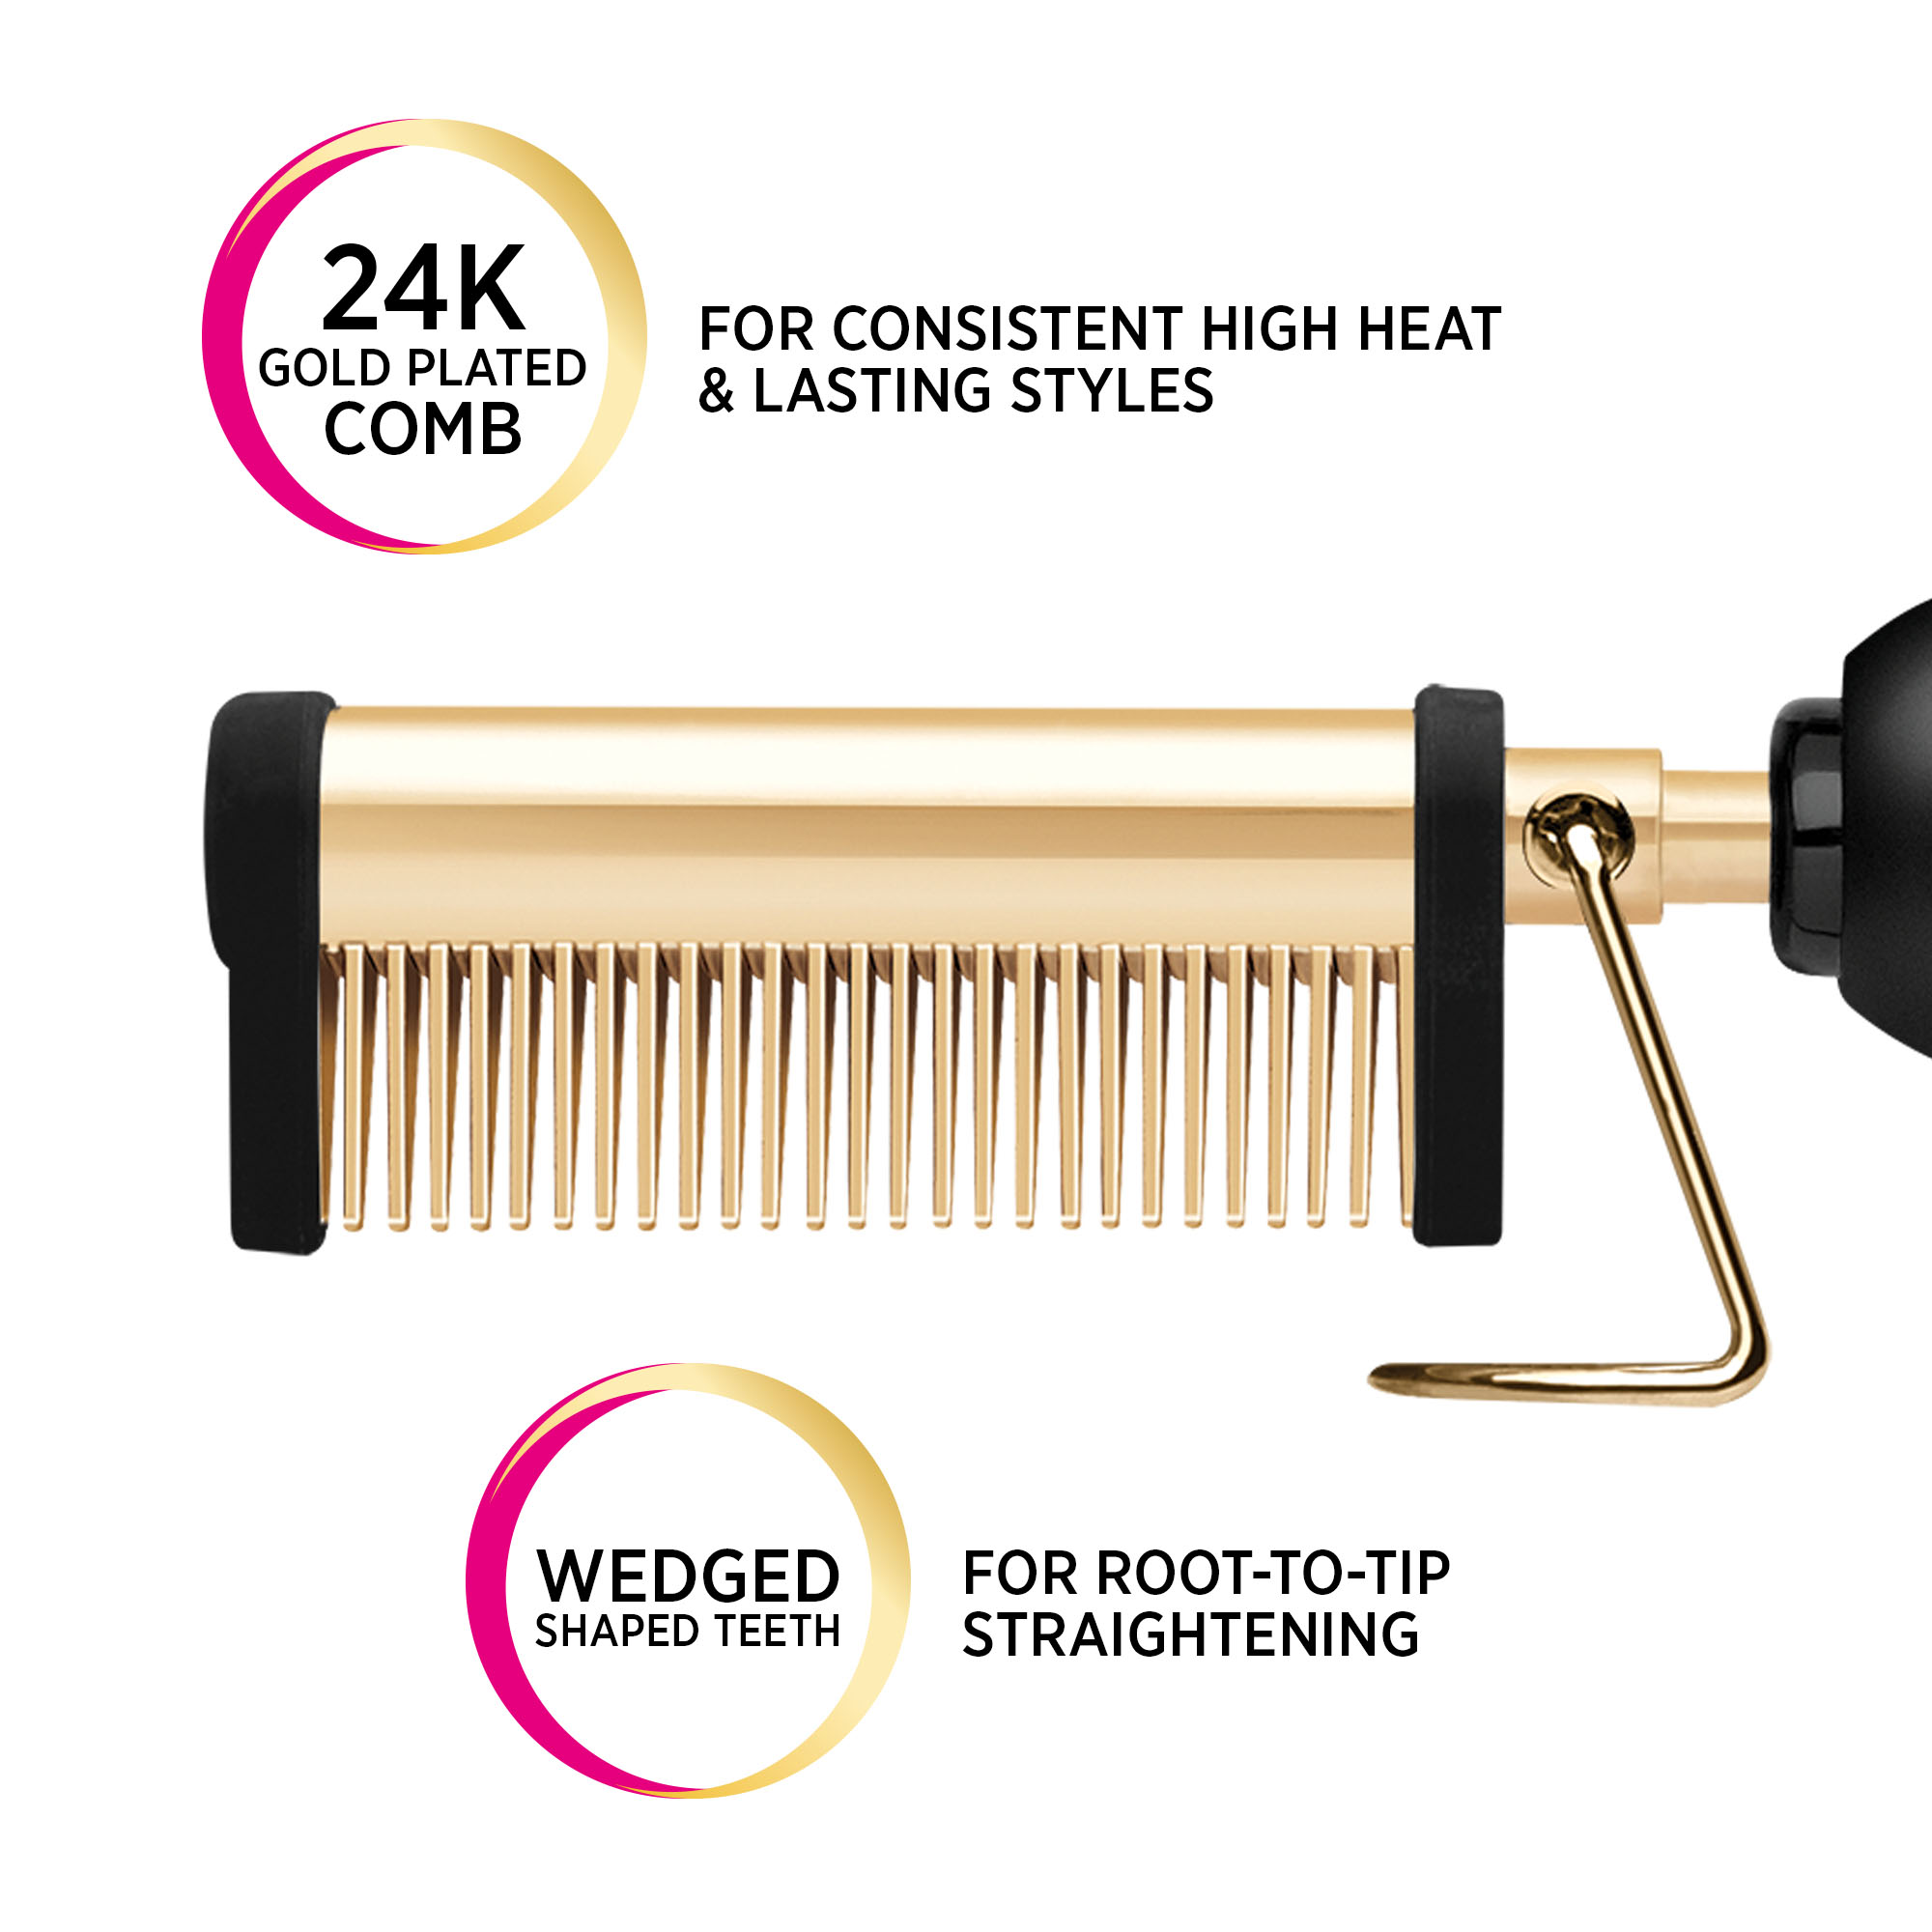 Gold N Hot 24K Gold Hair Straightening and Pressing Comb - image 2 of 6